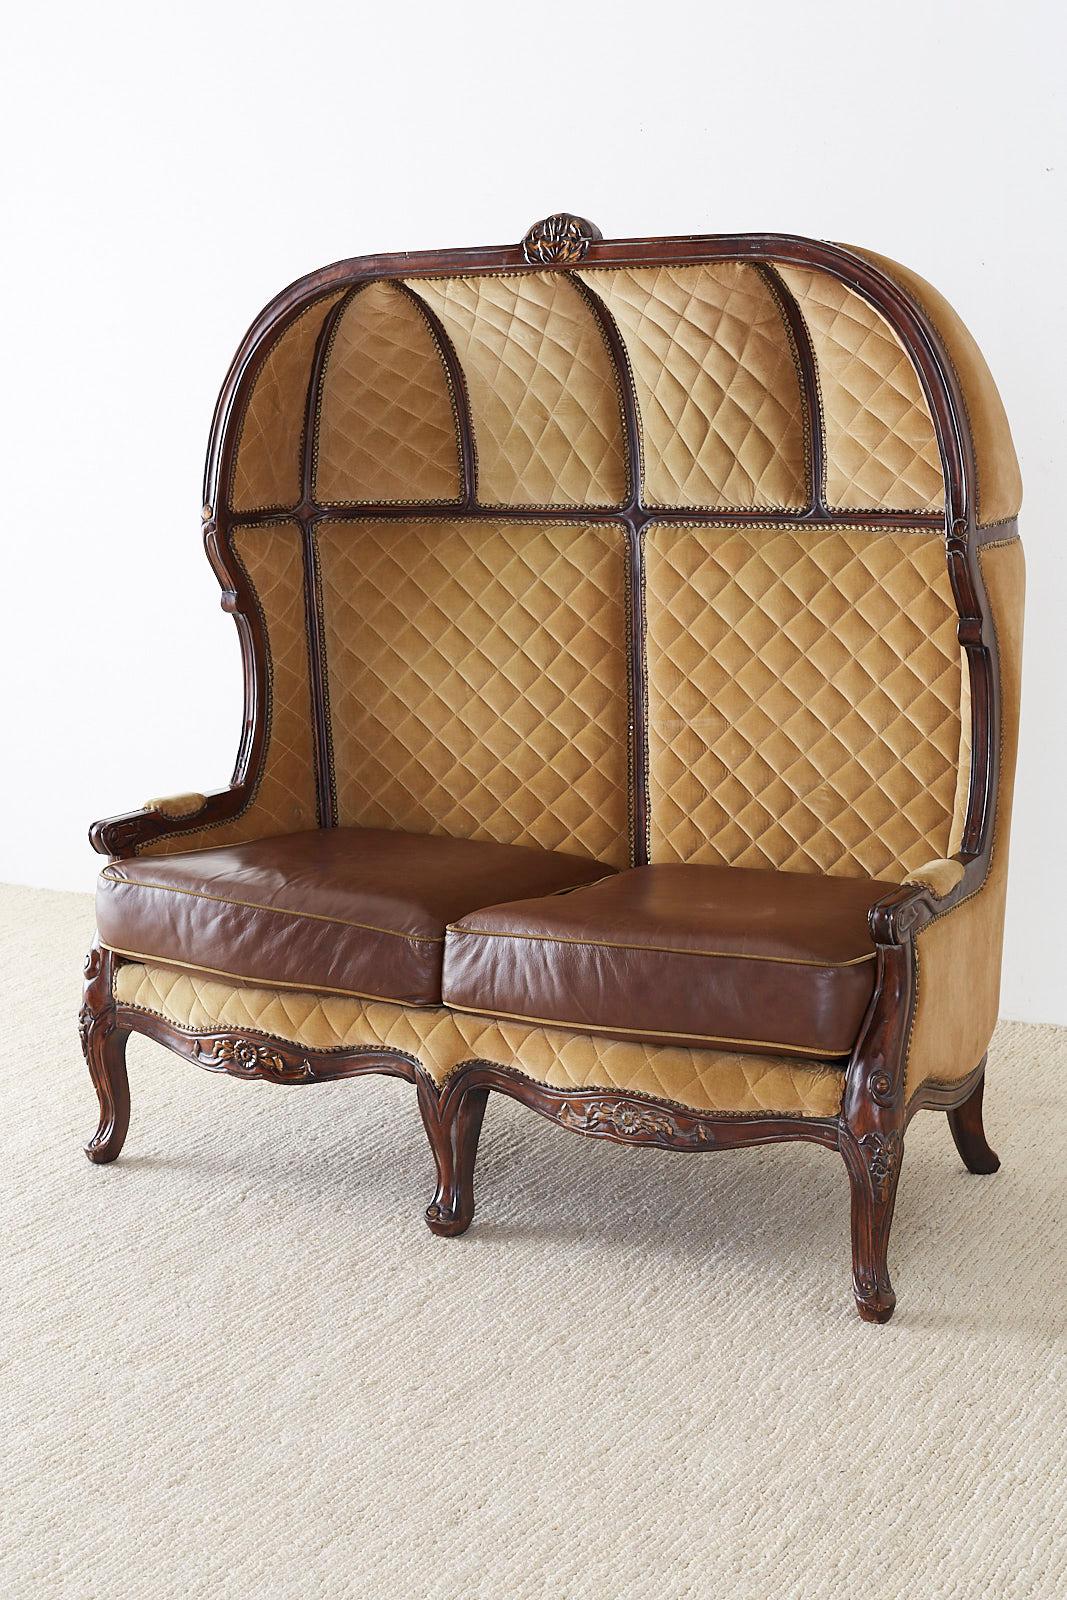 20th Century English Regency Style Porter's Settee or Canopy Settee